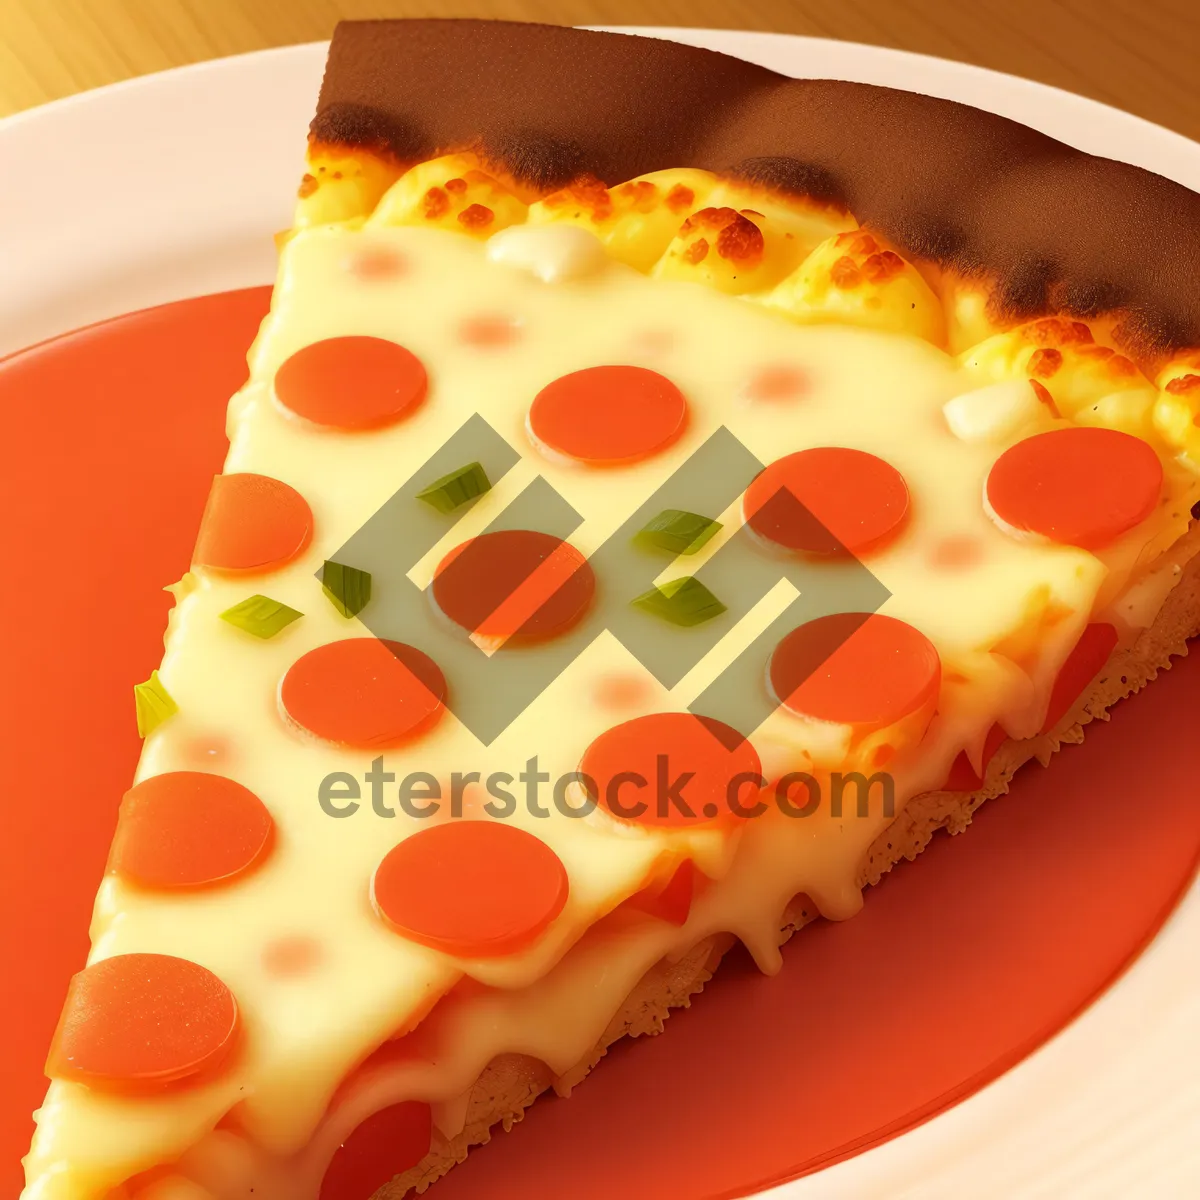 Picture of Delicious Tomato and Cheese Plate with Gourmet Sauce